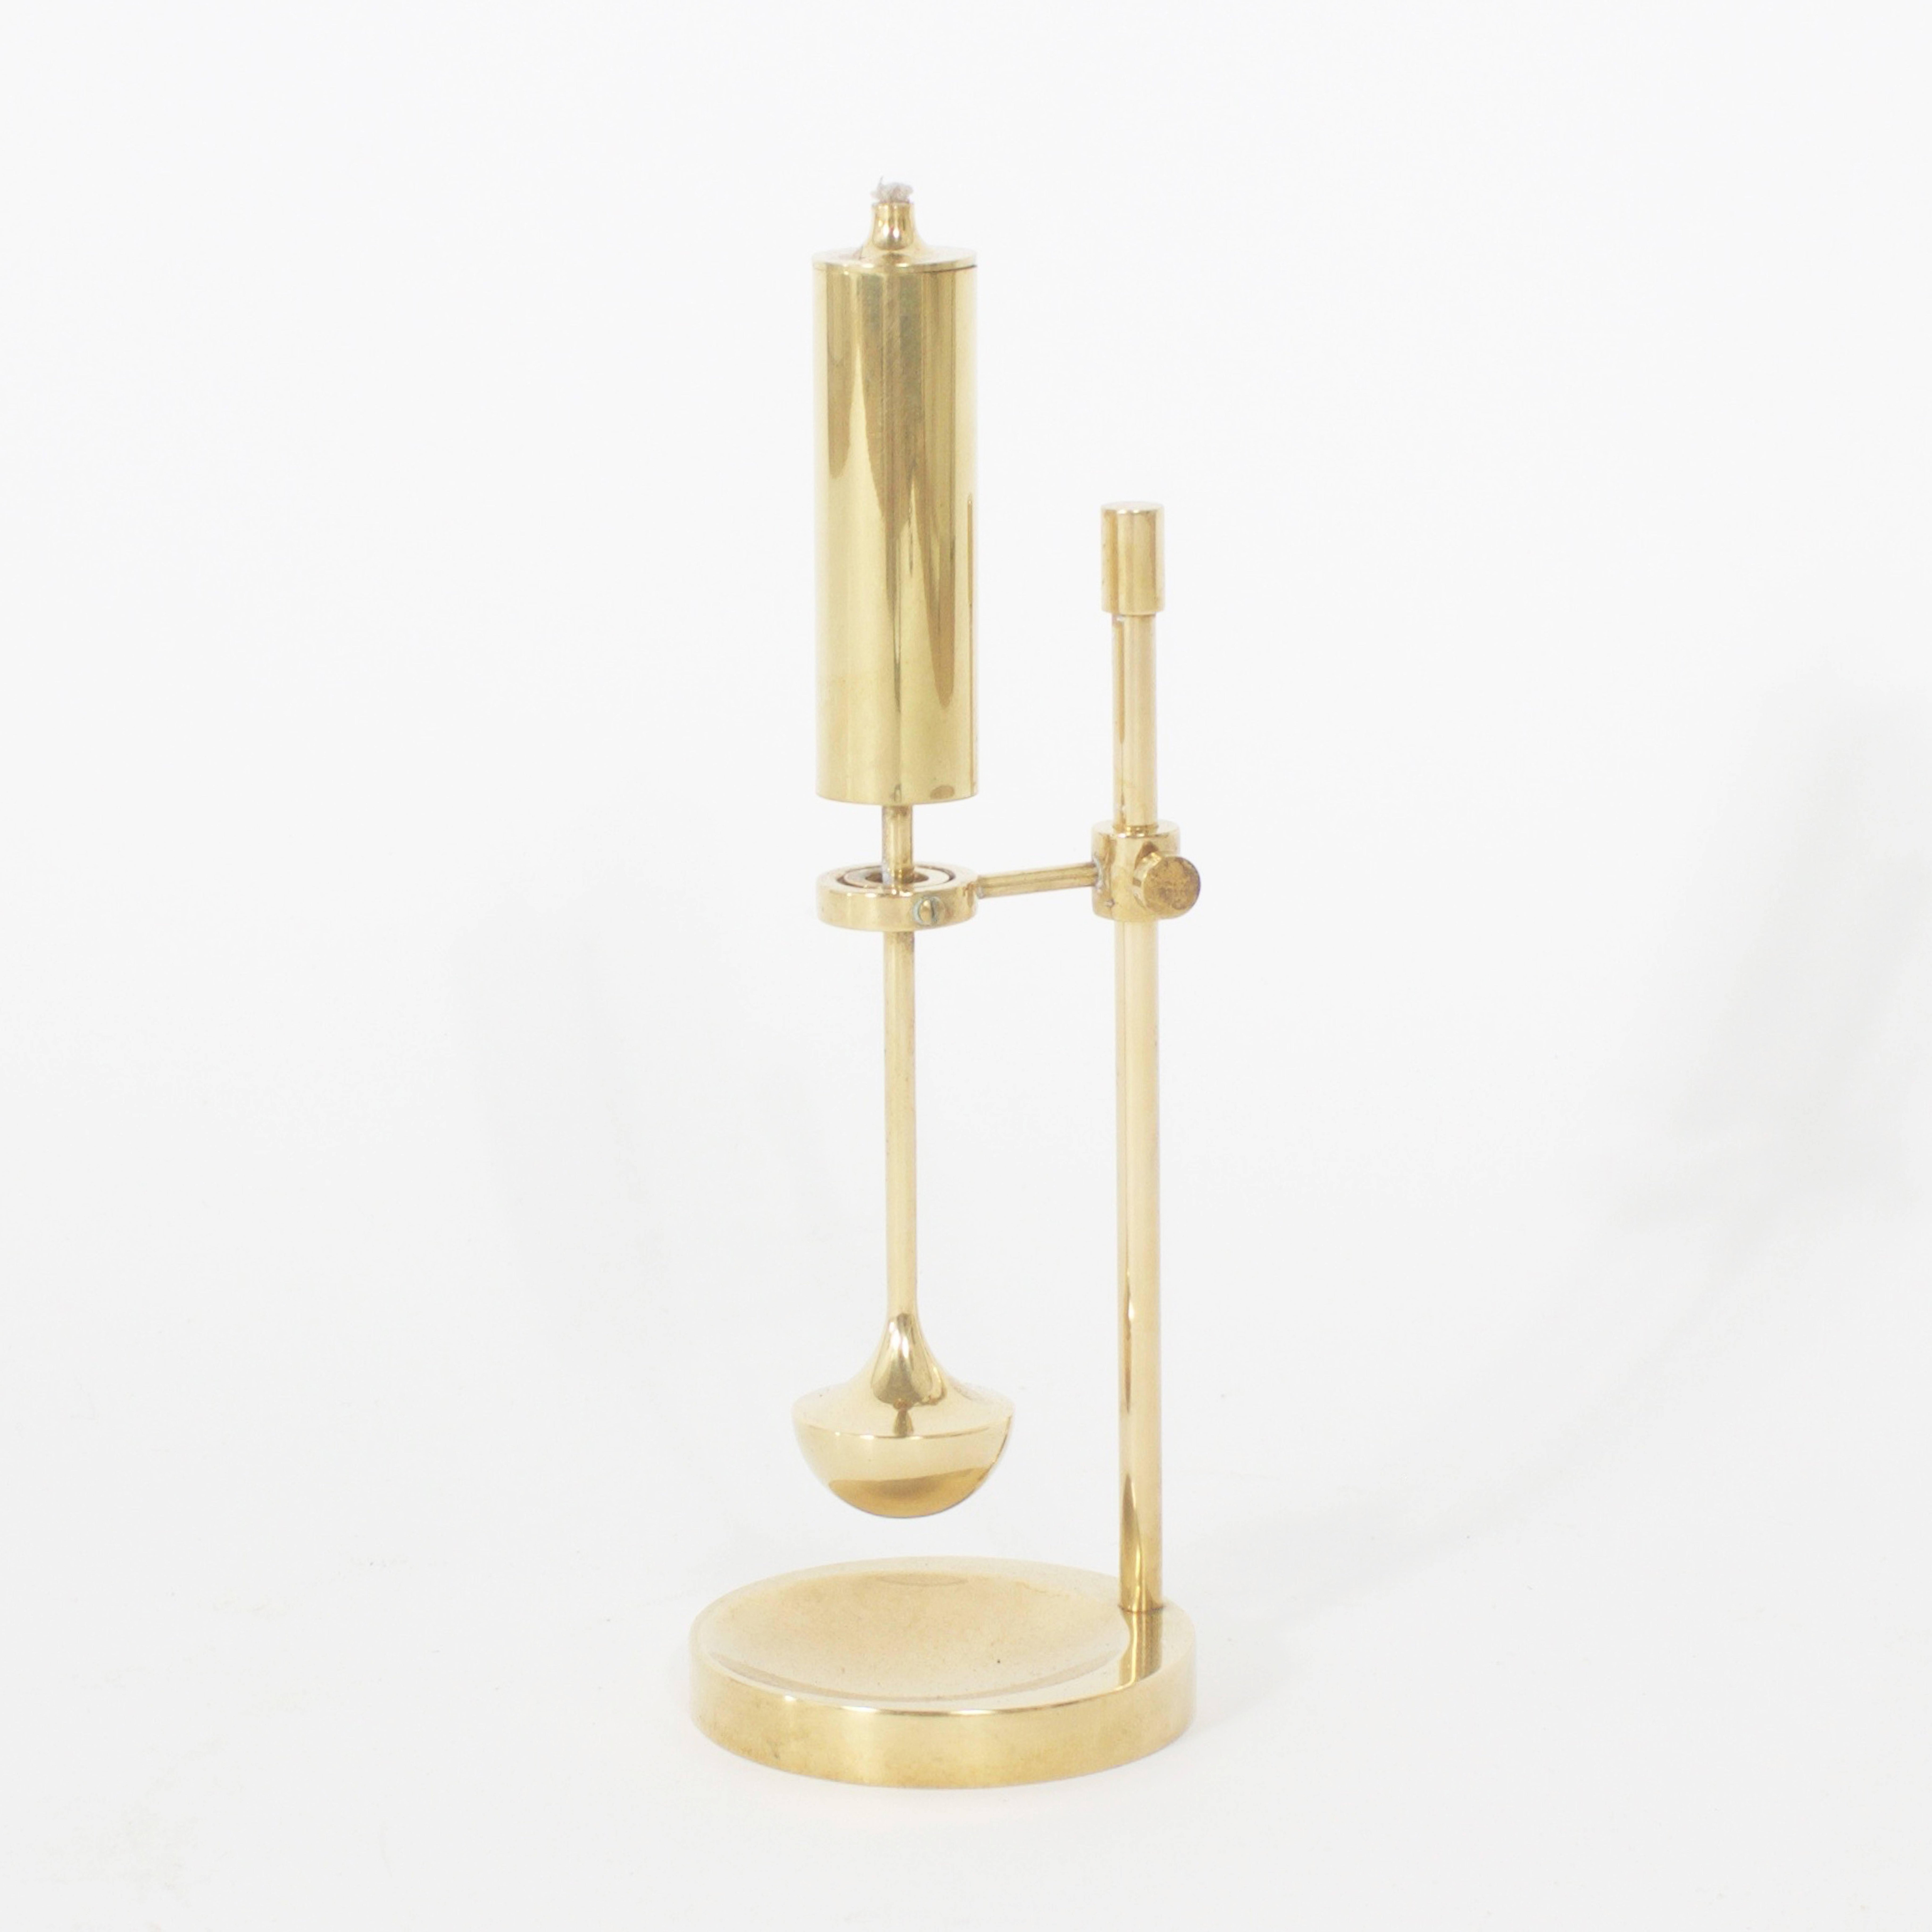 Eight Mid-Century, finely tooled and machined brass gyroscope oil lamps. Having adjustable height and a gyroscopic leveling device to kept at sea level. Form meets function with sleek modern design. Labeled and stamped on the bottom Ammonsen,